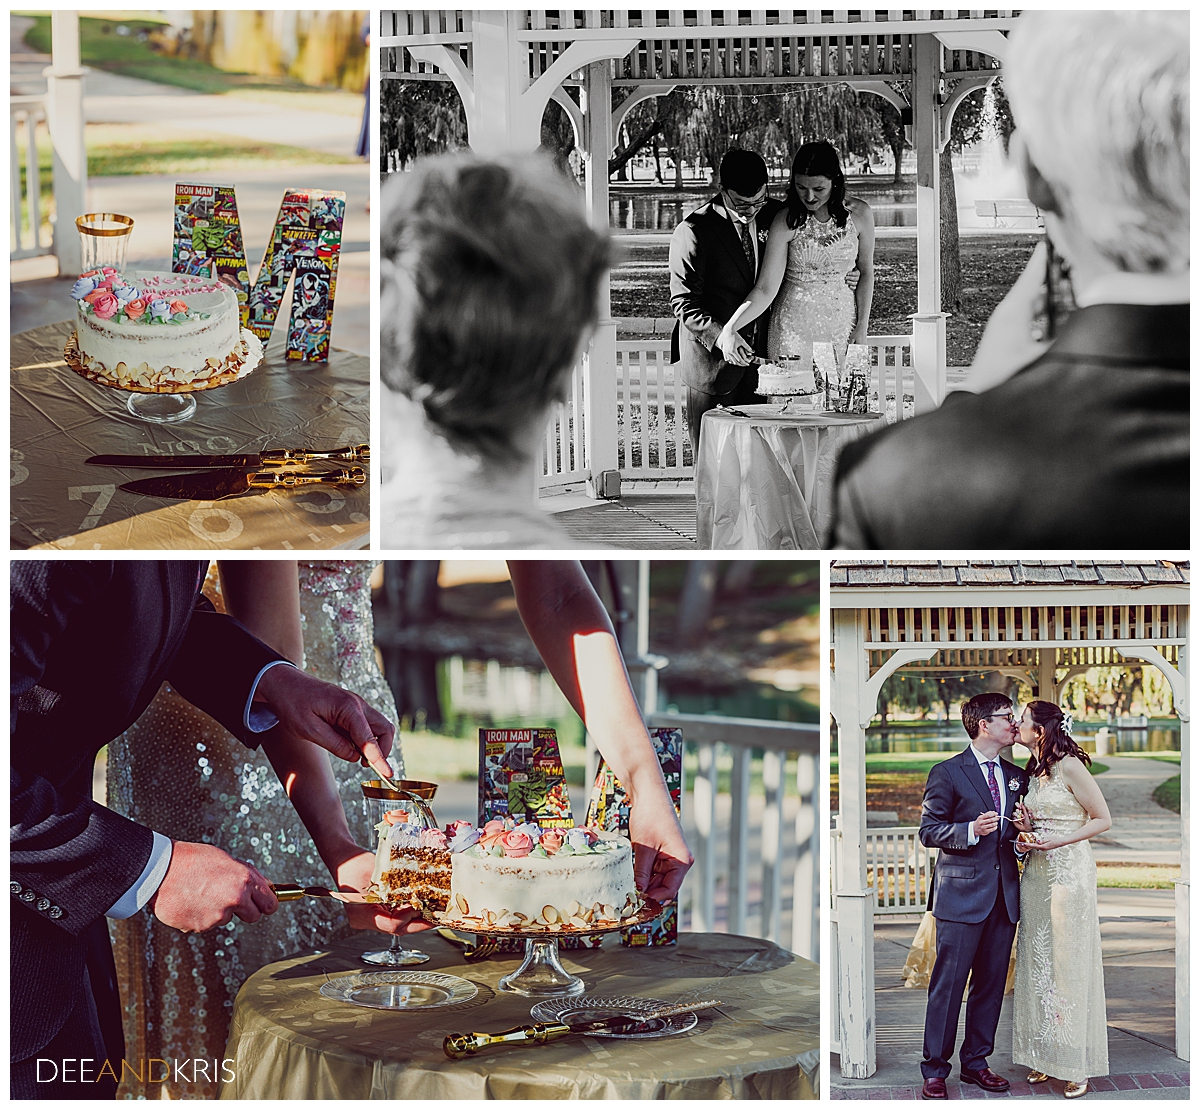 Four images: Top left color image of single tier cake with comic book decoupage M behind it. Top right black and white image of couple cutting the cake. Bottom left color image of cake being served by groom. Bottom right color image of couple holding cake while kissing.